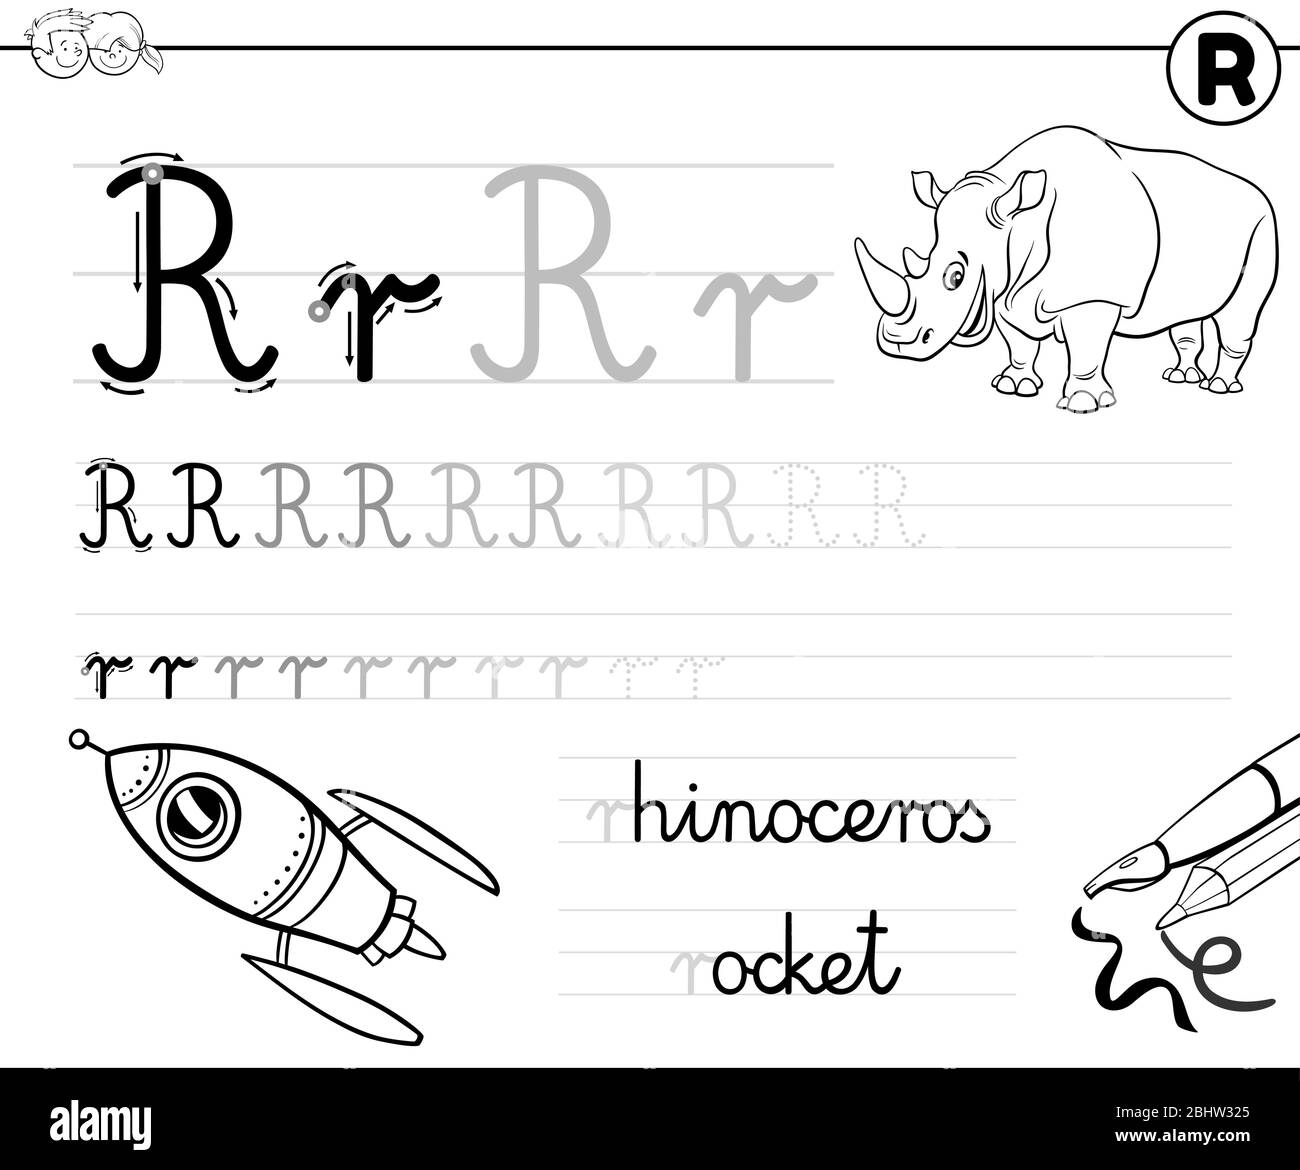 Black and White Cartoon Illustration of Writing Skills Practice Worksheet with Letter R for Preschool and Elementary Age Children Coloring Book Stock Vector